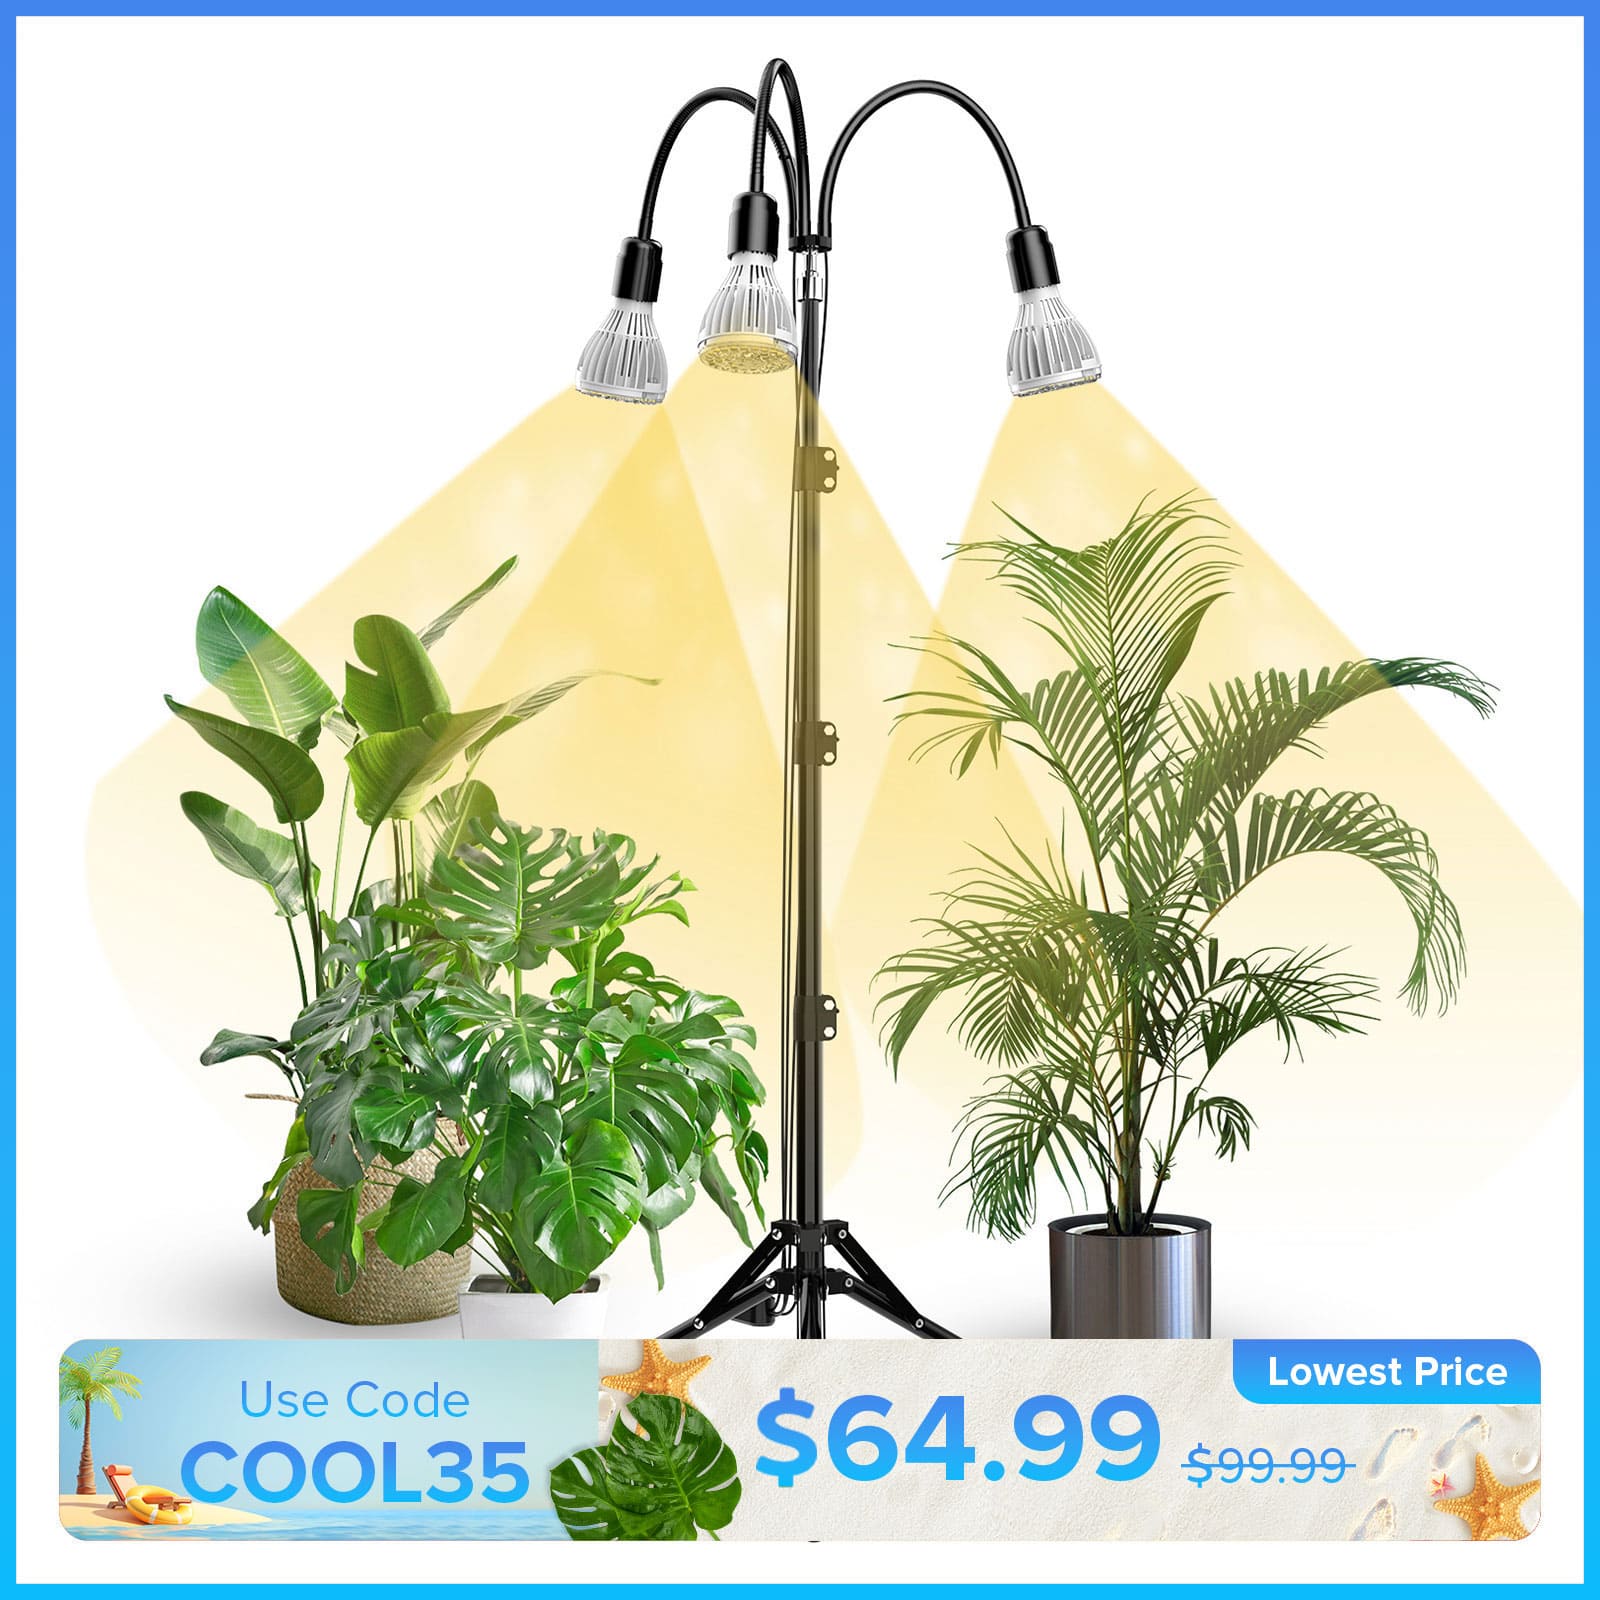 90W Grow Light with Adjustable Tripod Stand (US ONLY)